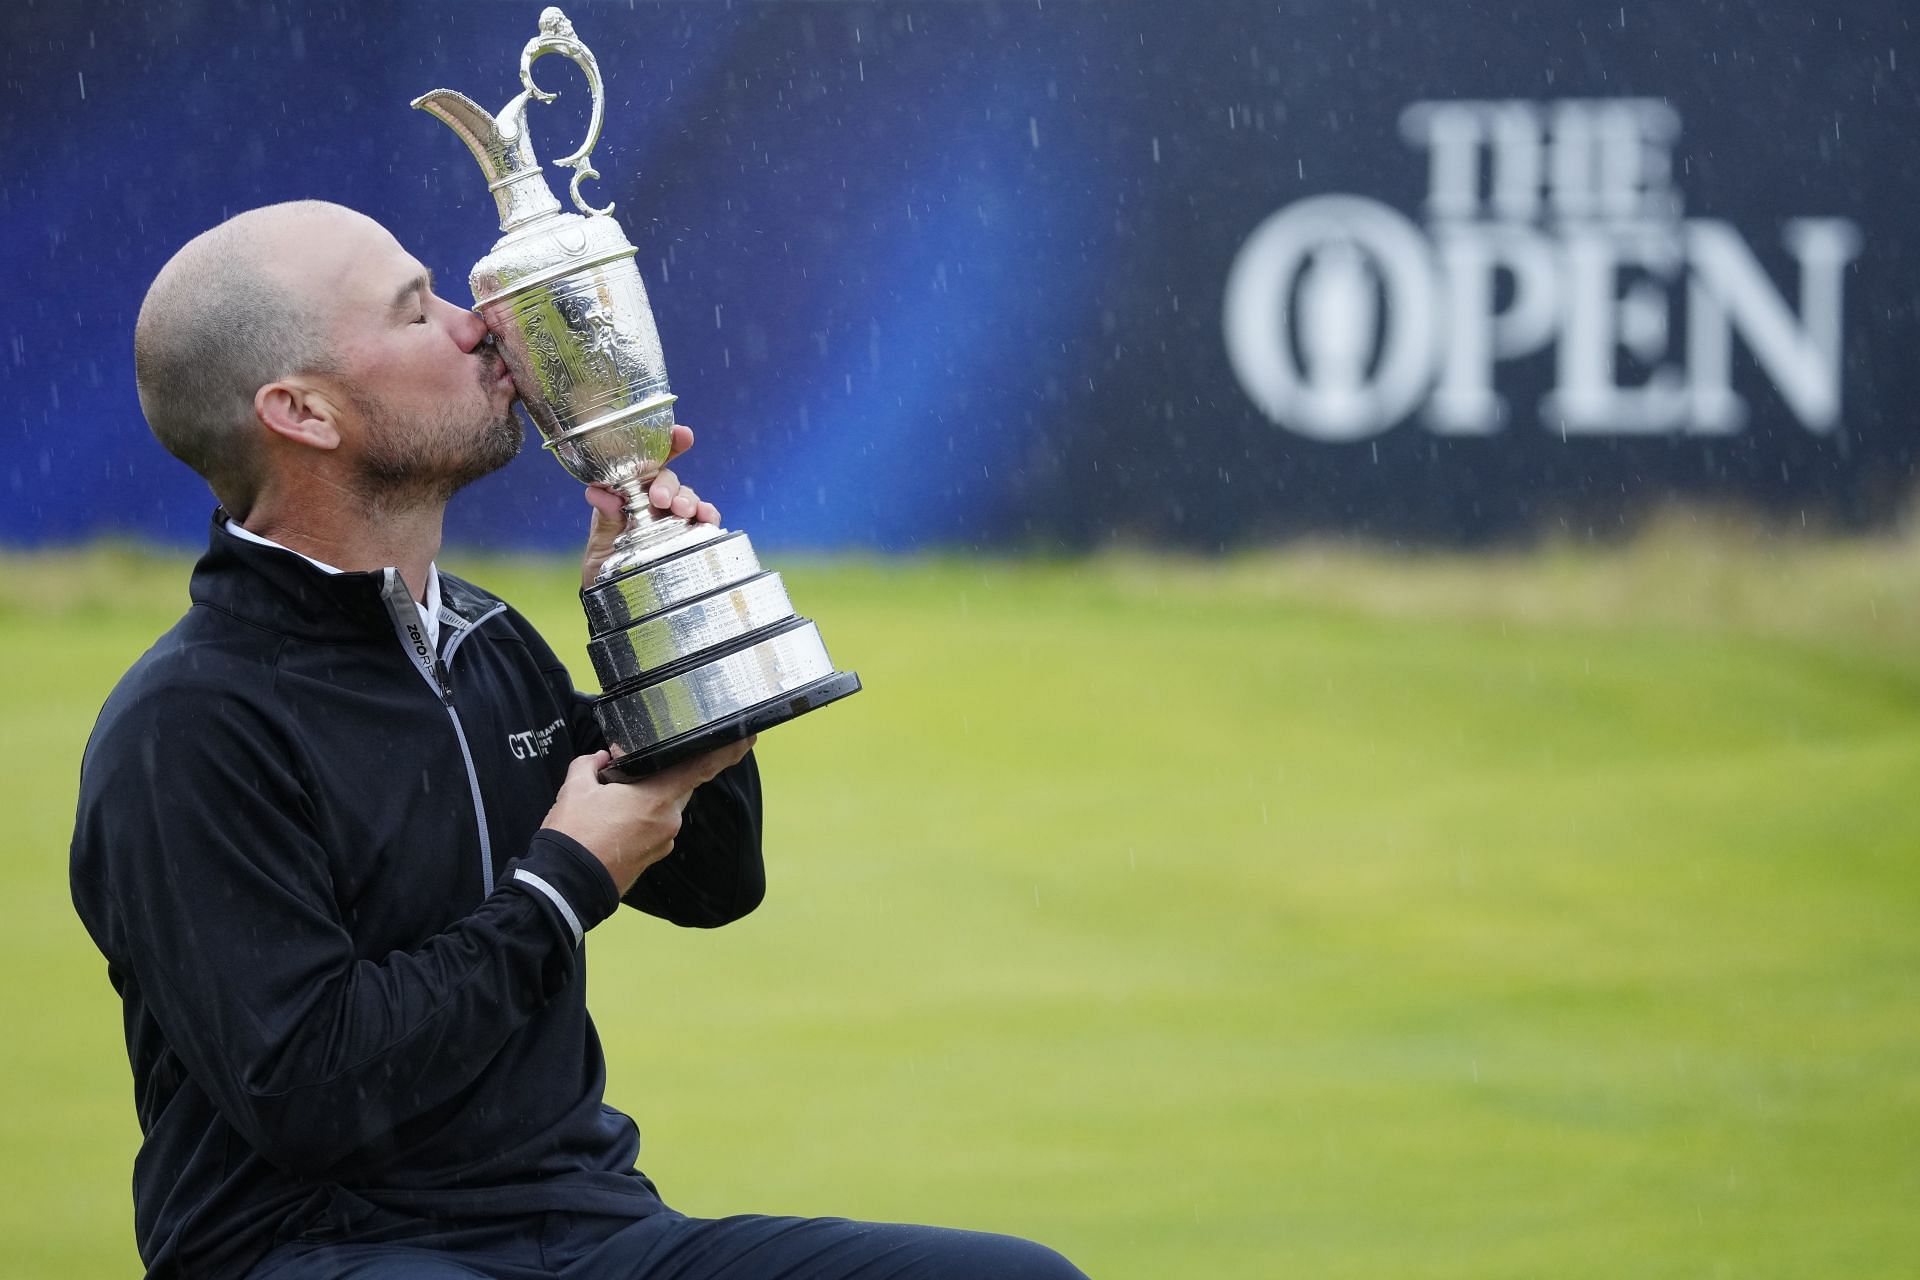 Brian Harman kisses the Claret Jug after winning the 151st Open Championship